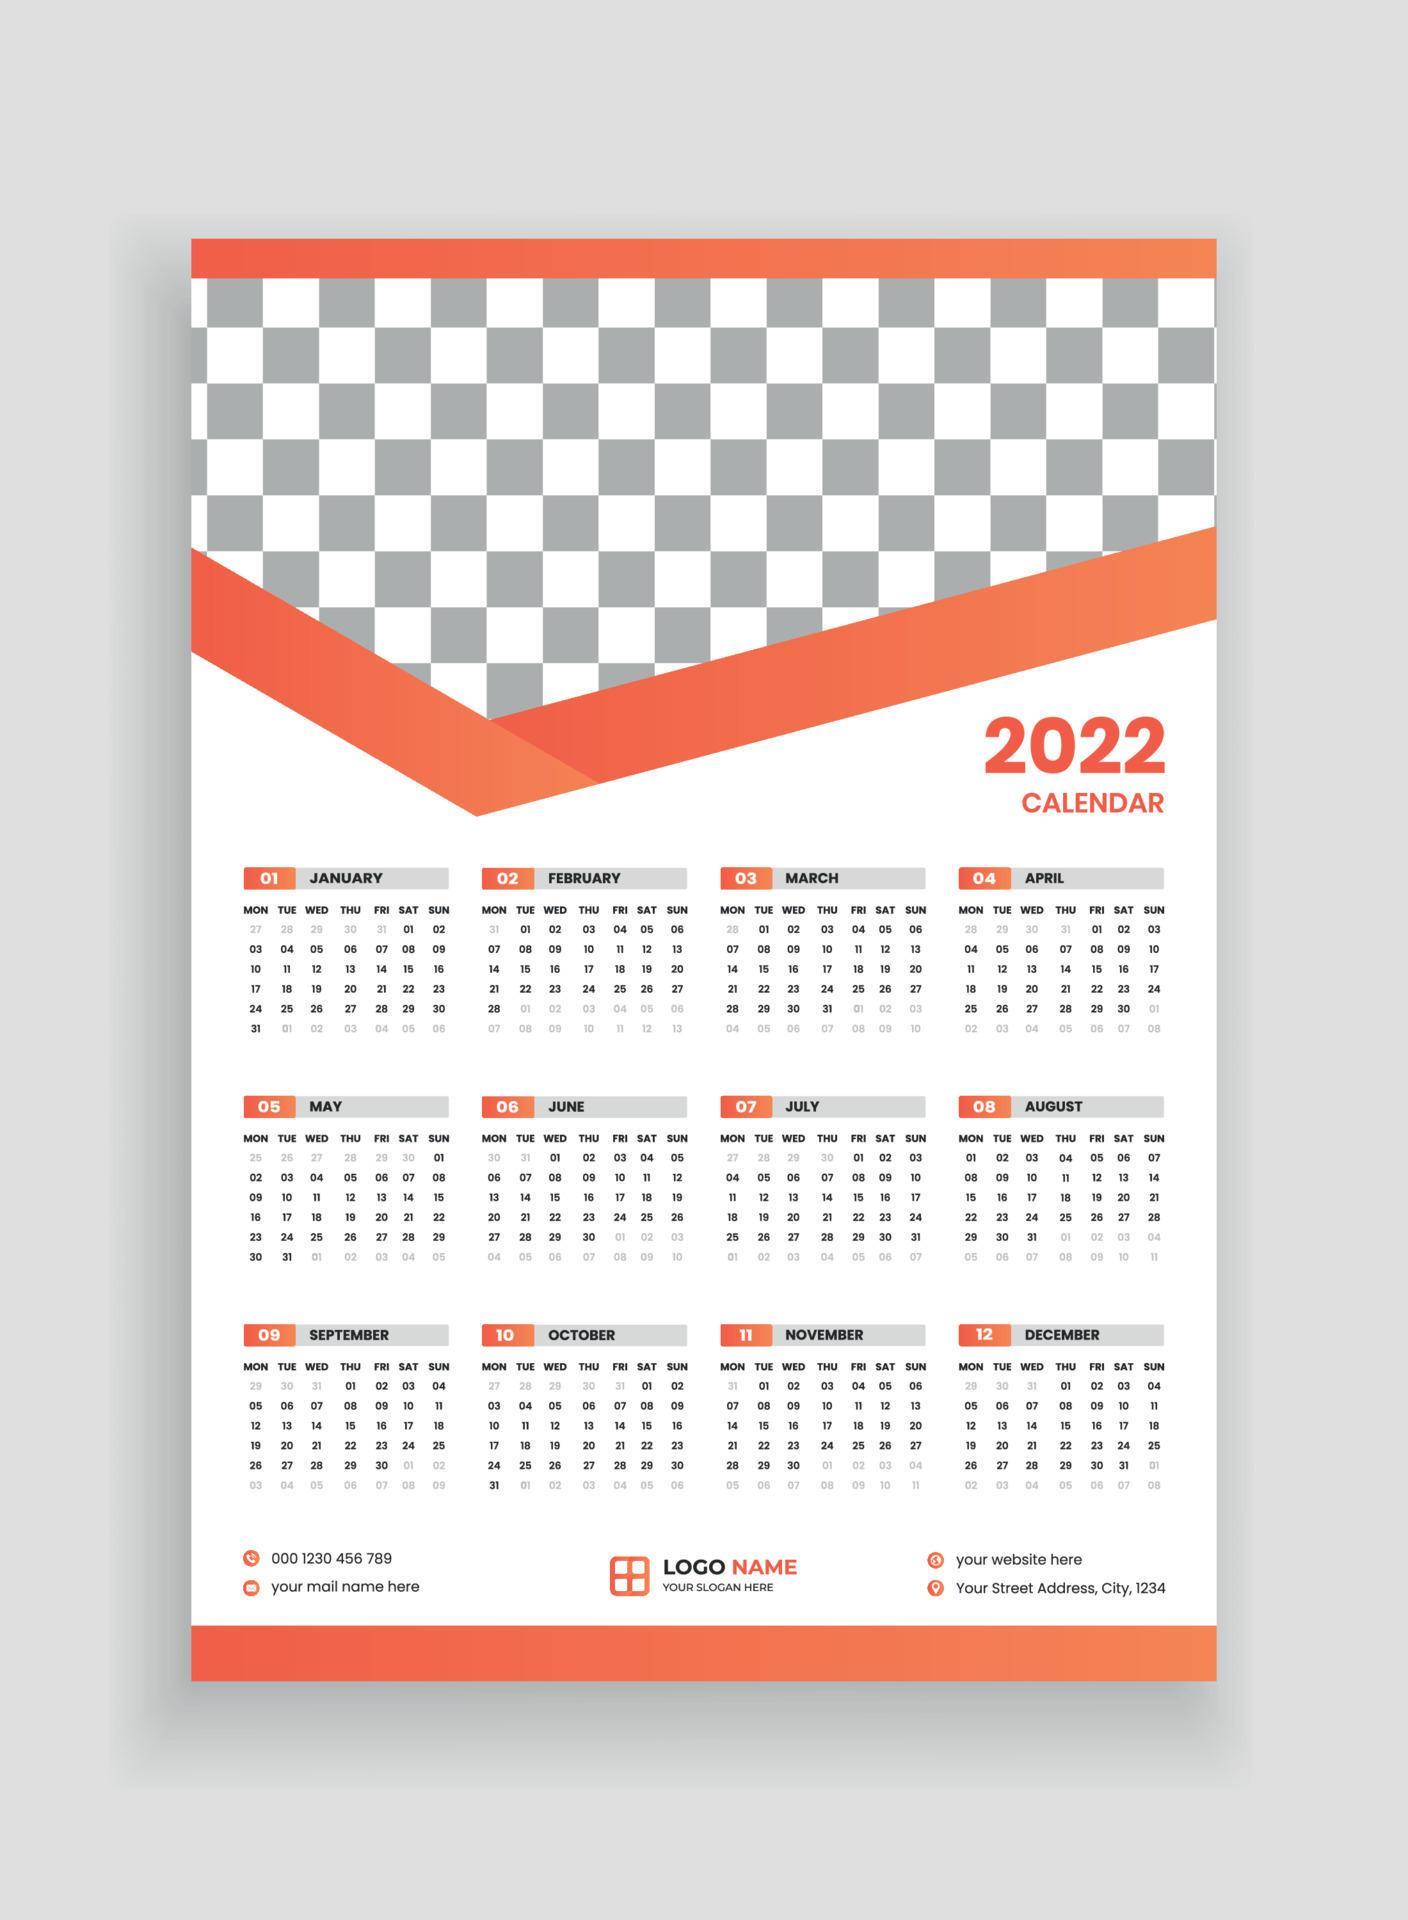 Free 2022 Wall Calendar By Mail One Page Wall Calendar Design 2022. Wall Calendar Design 2022. New Year  Calendar Design 2022. Week Starts On Monday. Template For Annual Calendar  2022 3528104 Vector Art At Vecteezy